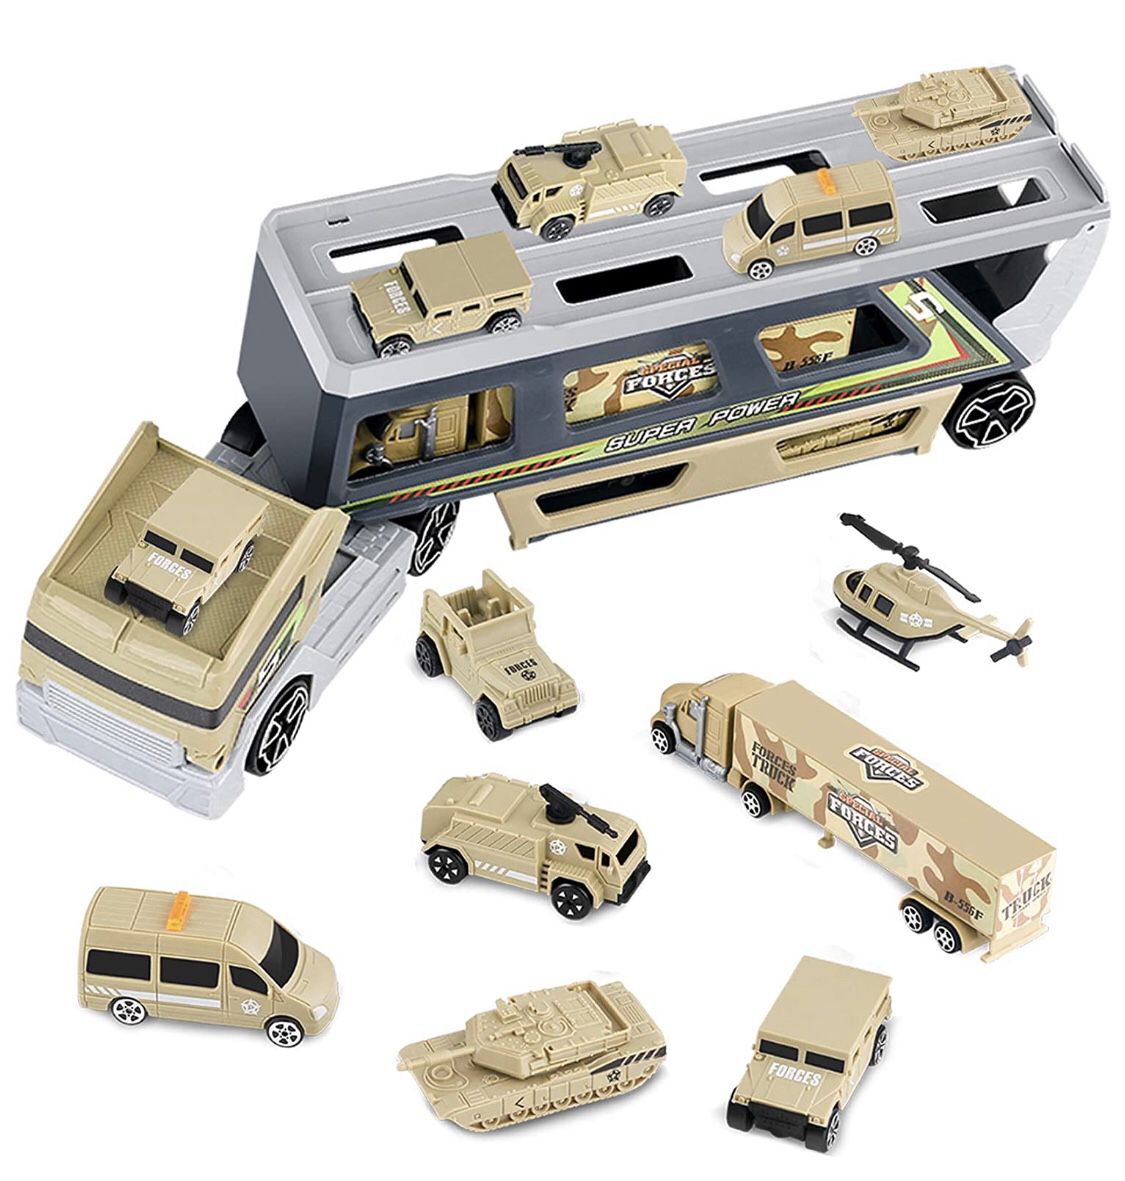 Brand new Military Truck Set, pingqian 7 in 1 Mini Die-cast Battle Car (pick up only)